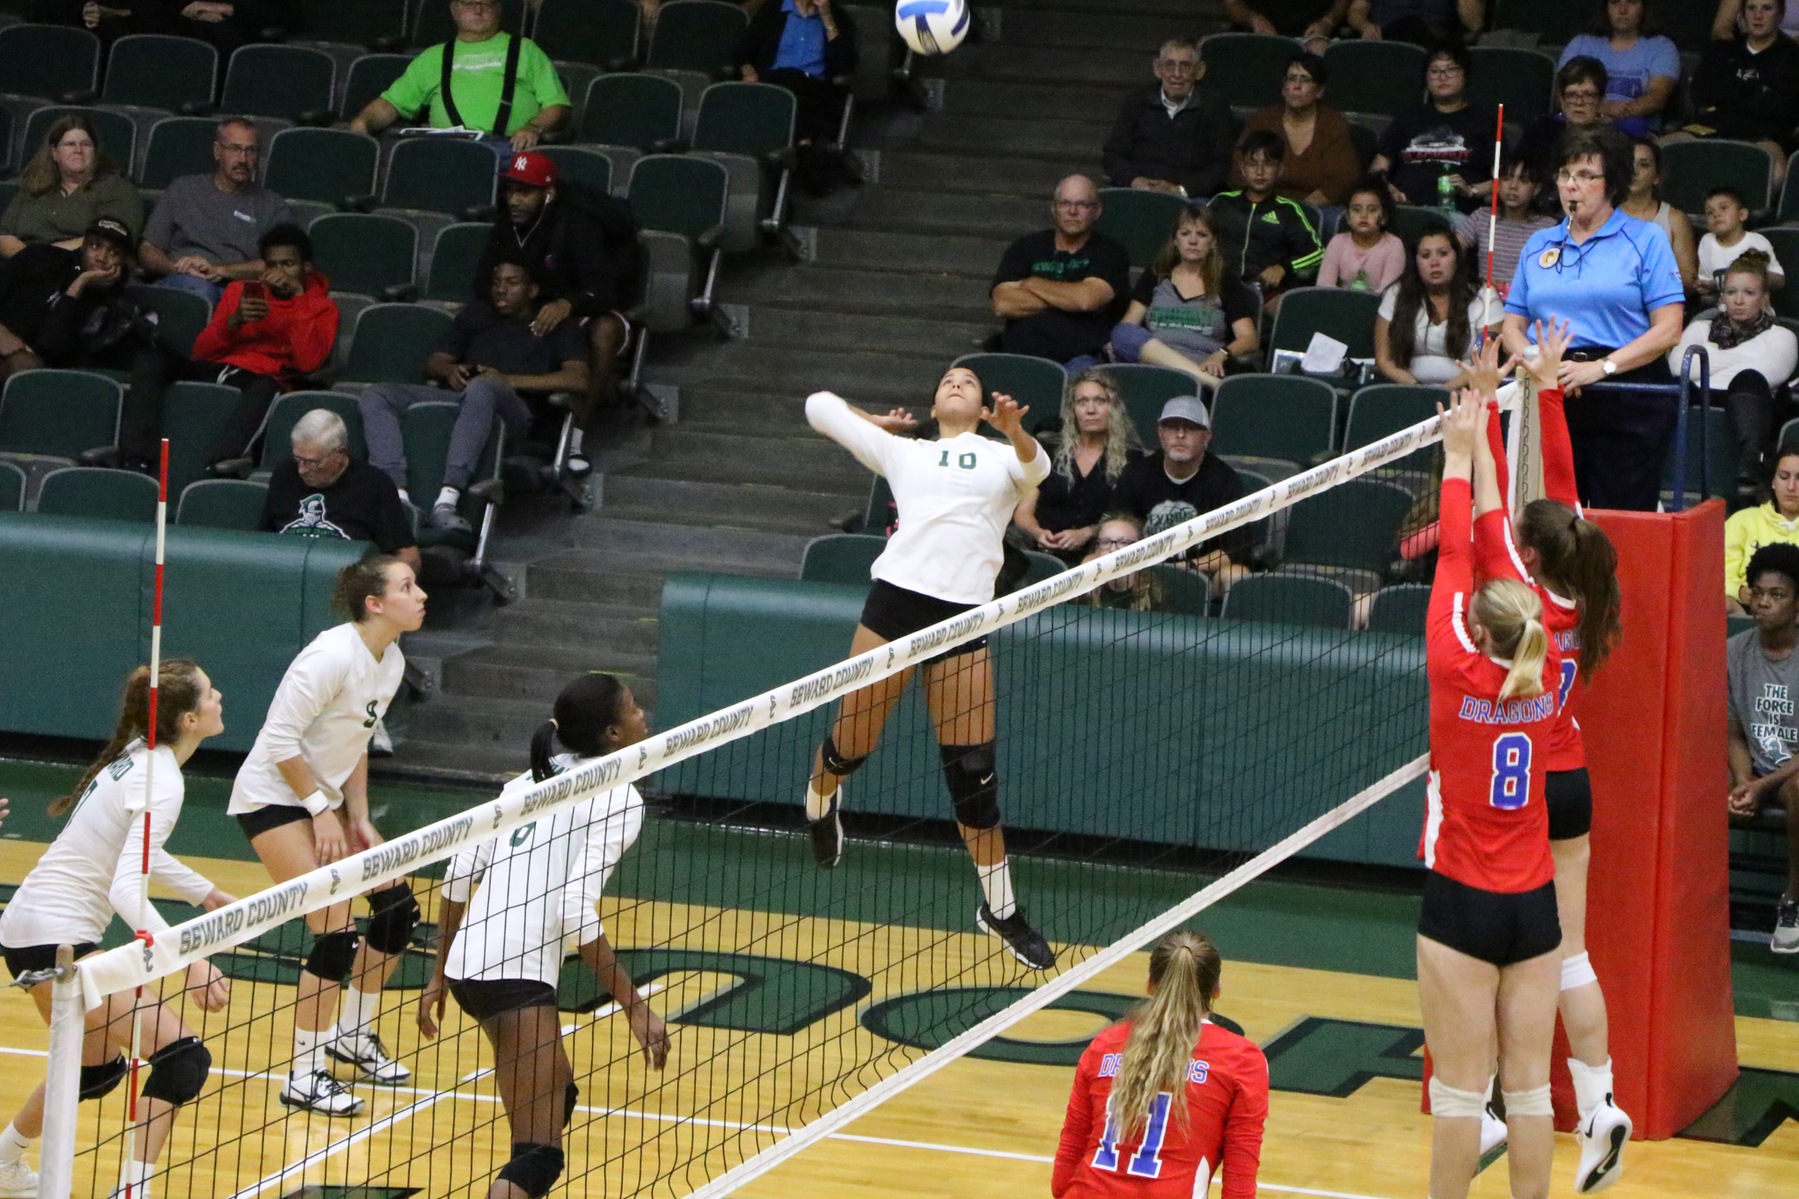 No. 3 Lady Saints rally to knock off Hutchinson Blue Dragons in four sets